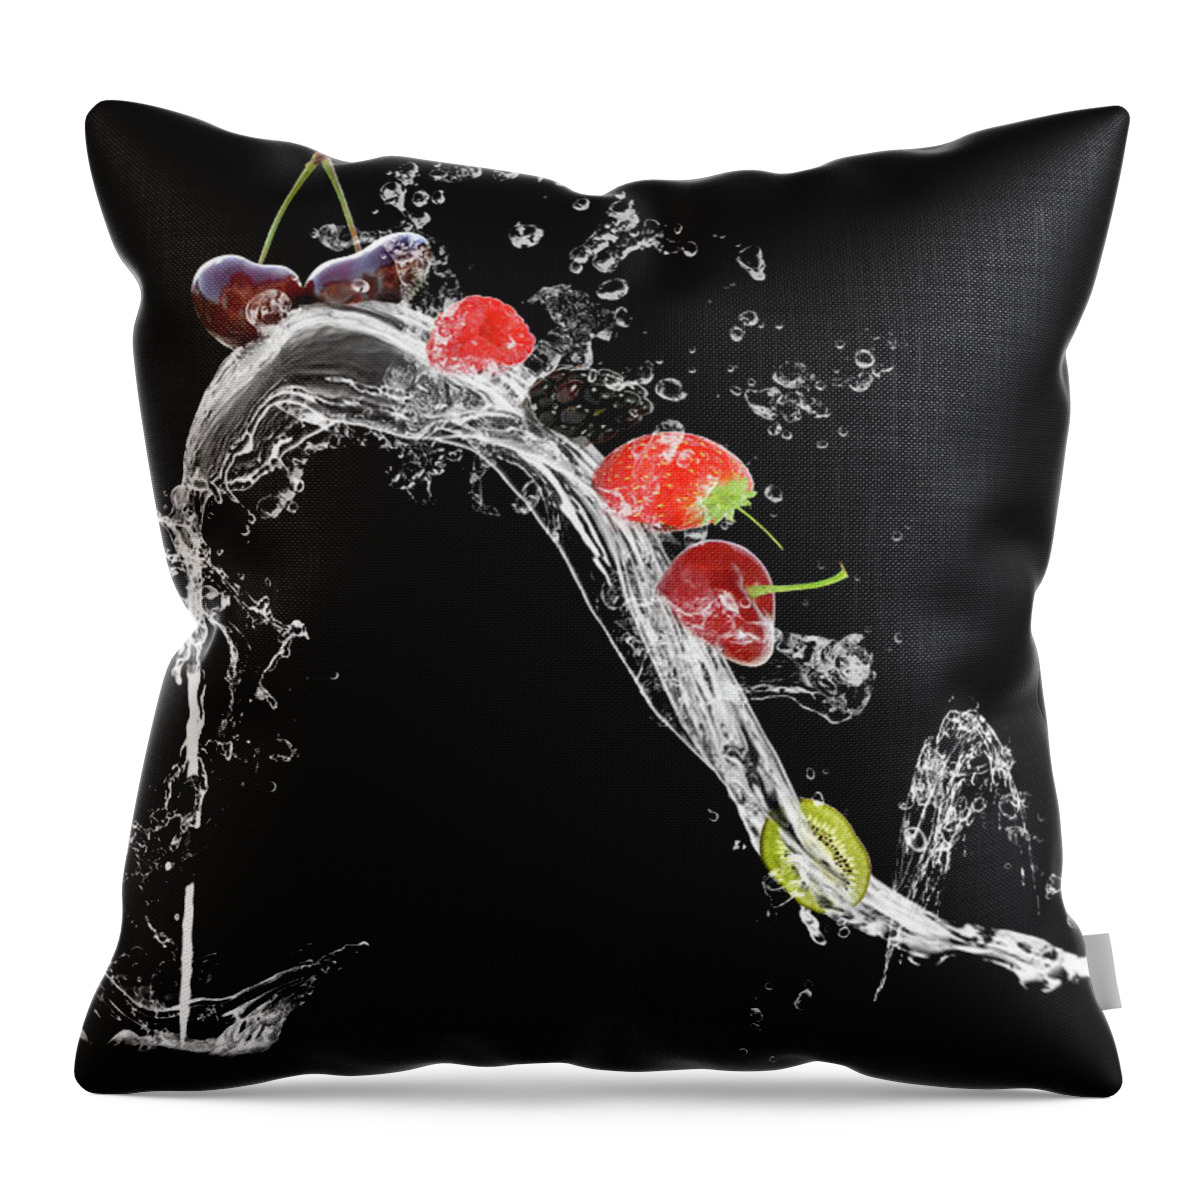  Fruits Throw Pillow featuring the photograph Fruitshoe by Christine Sponchia